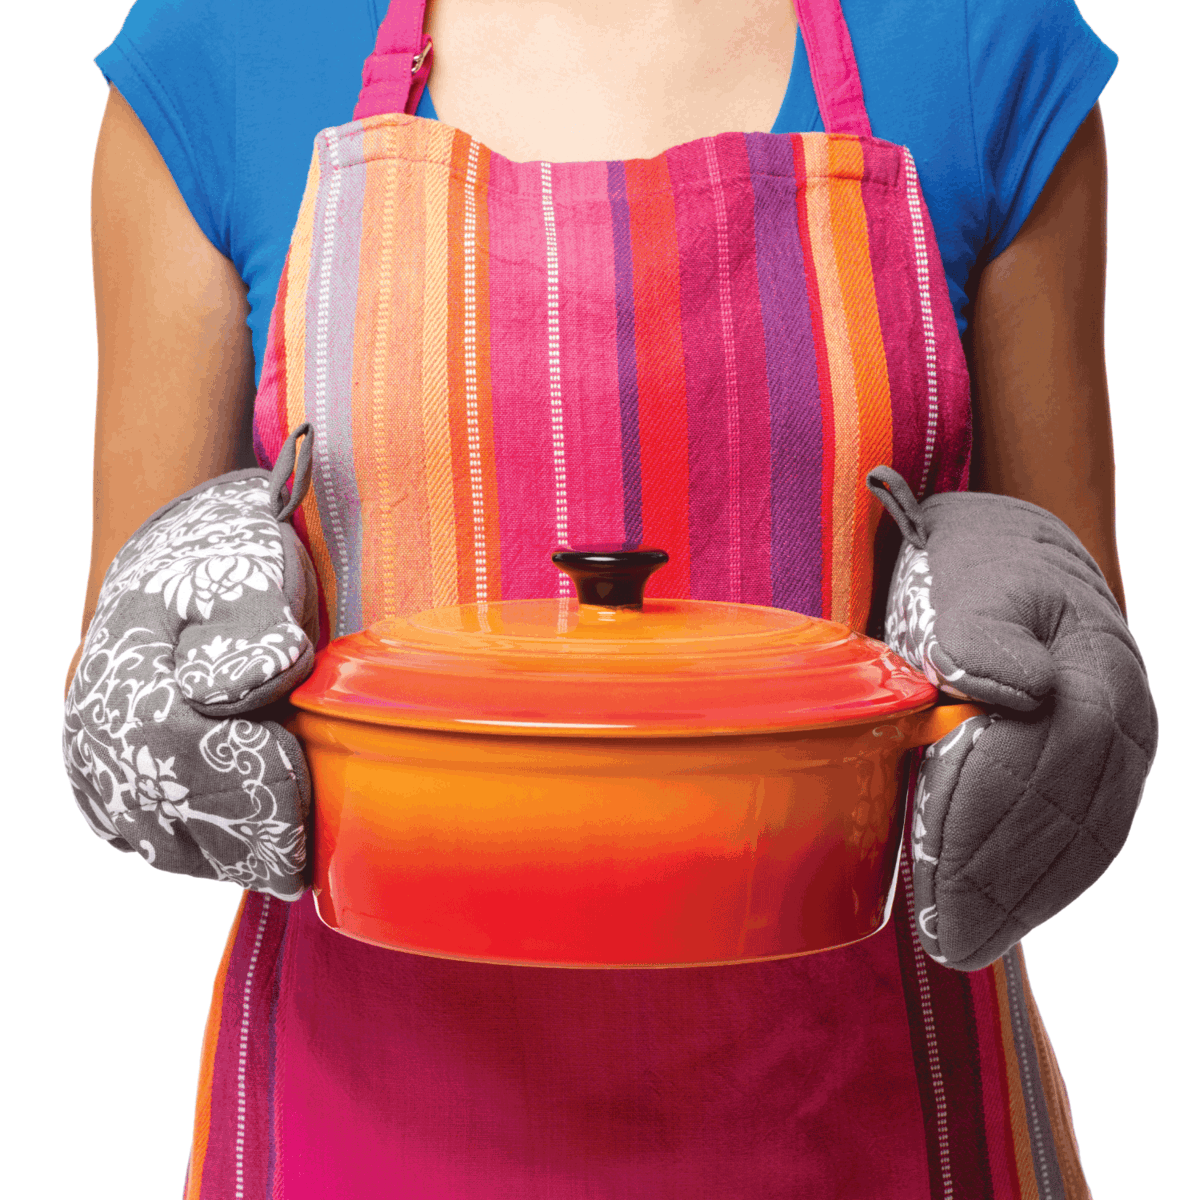 Midsection of woman in a multi colored apron holding a casserole